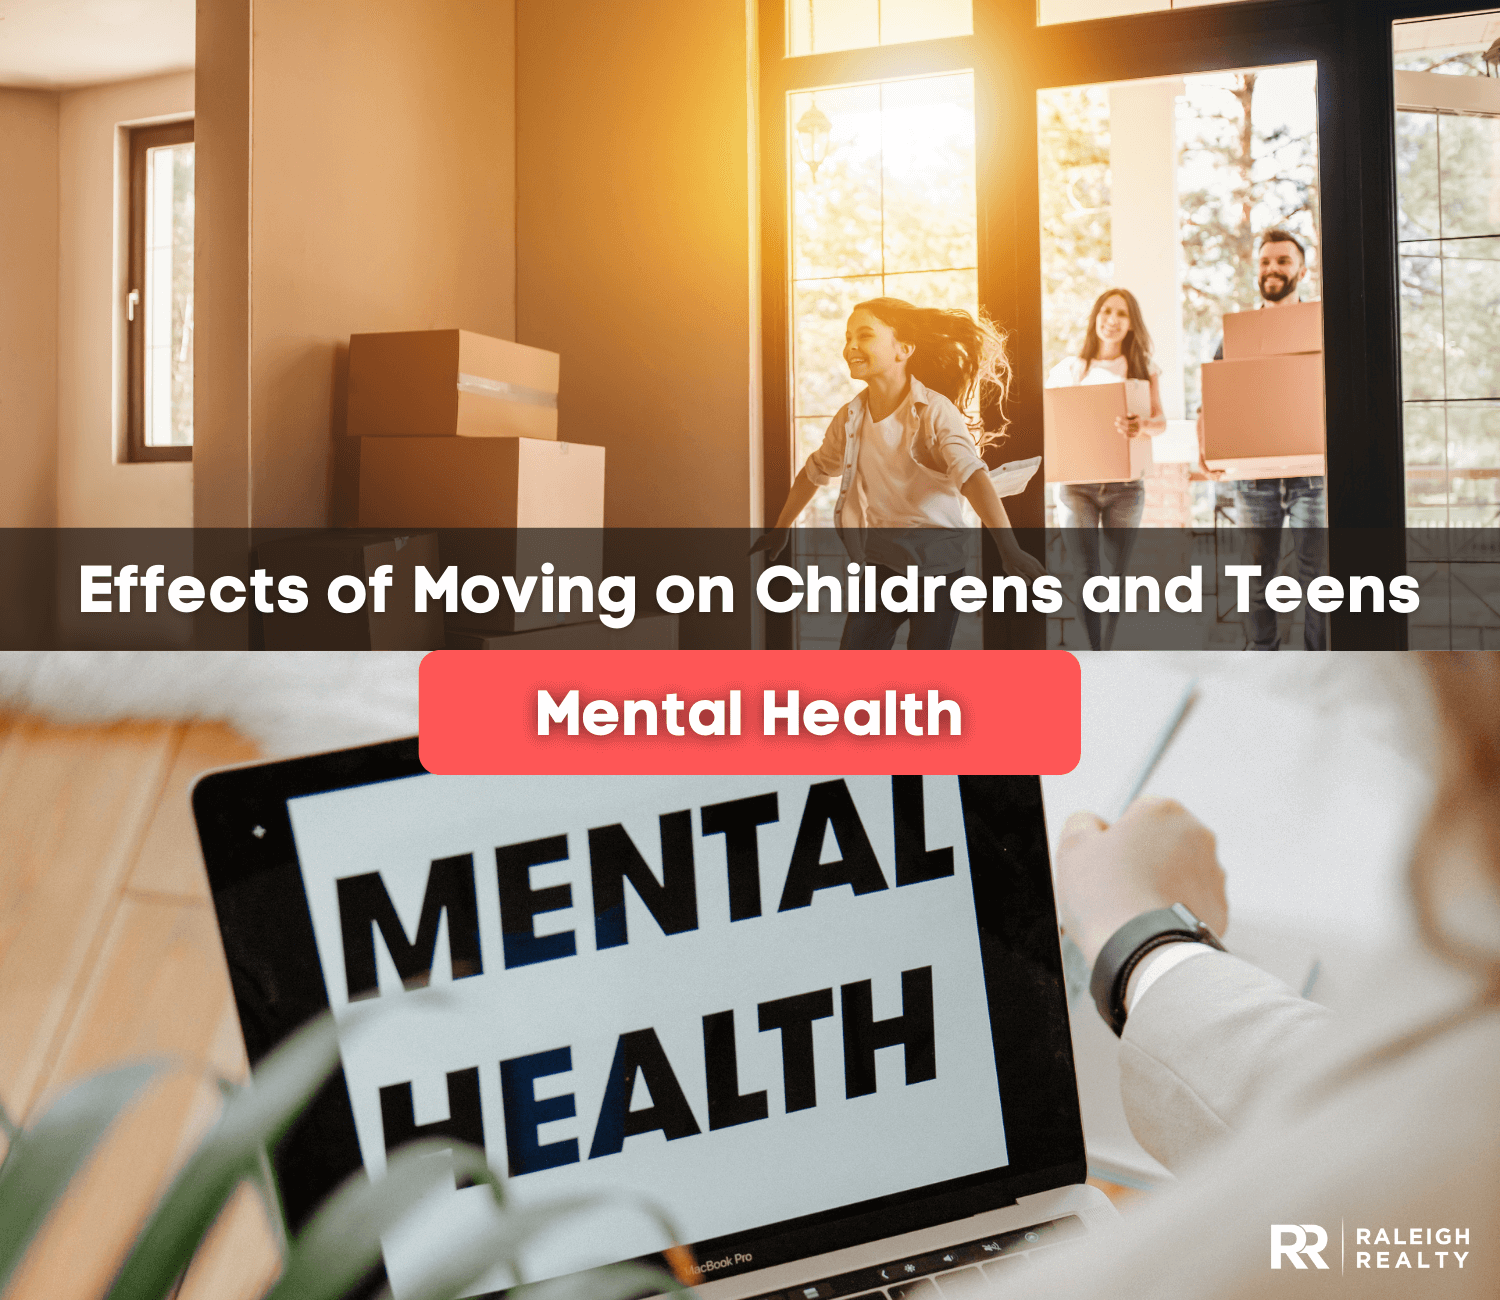 Effects of Moving on Childrens and Teens Mental Health